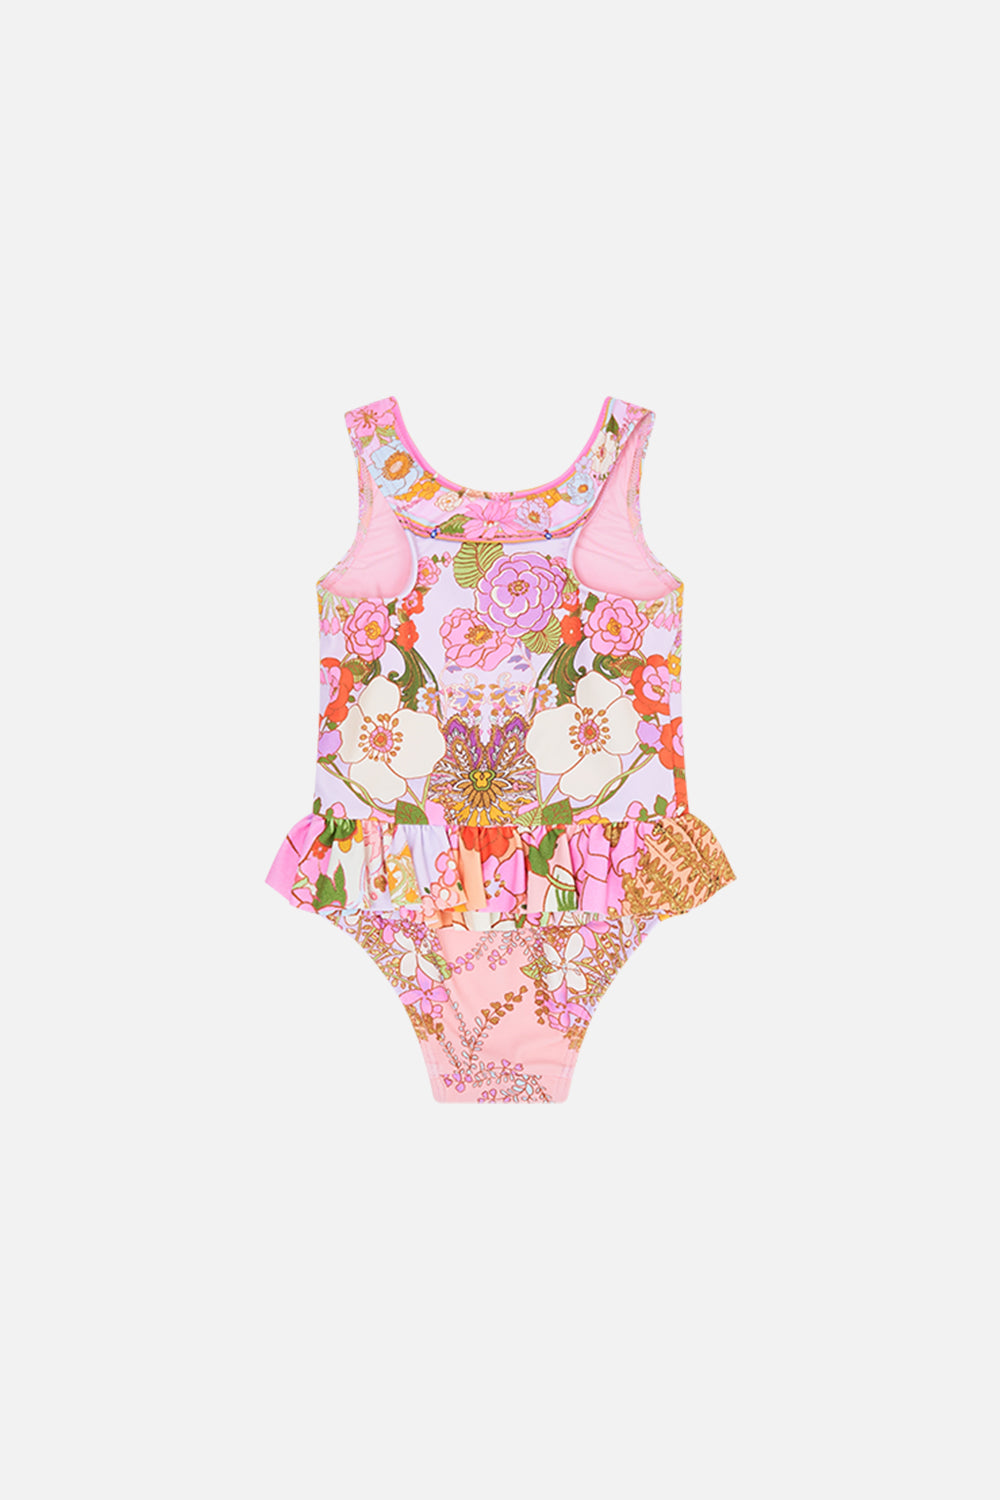 Milla by CAMILLA babie ruffle onepiece swimsuit in Clever Clogs print